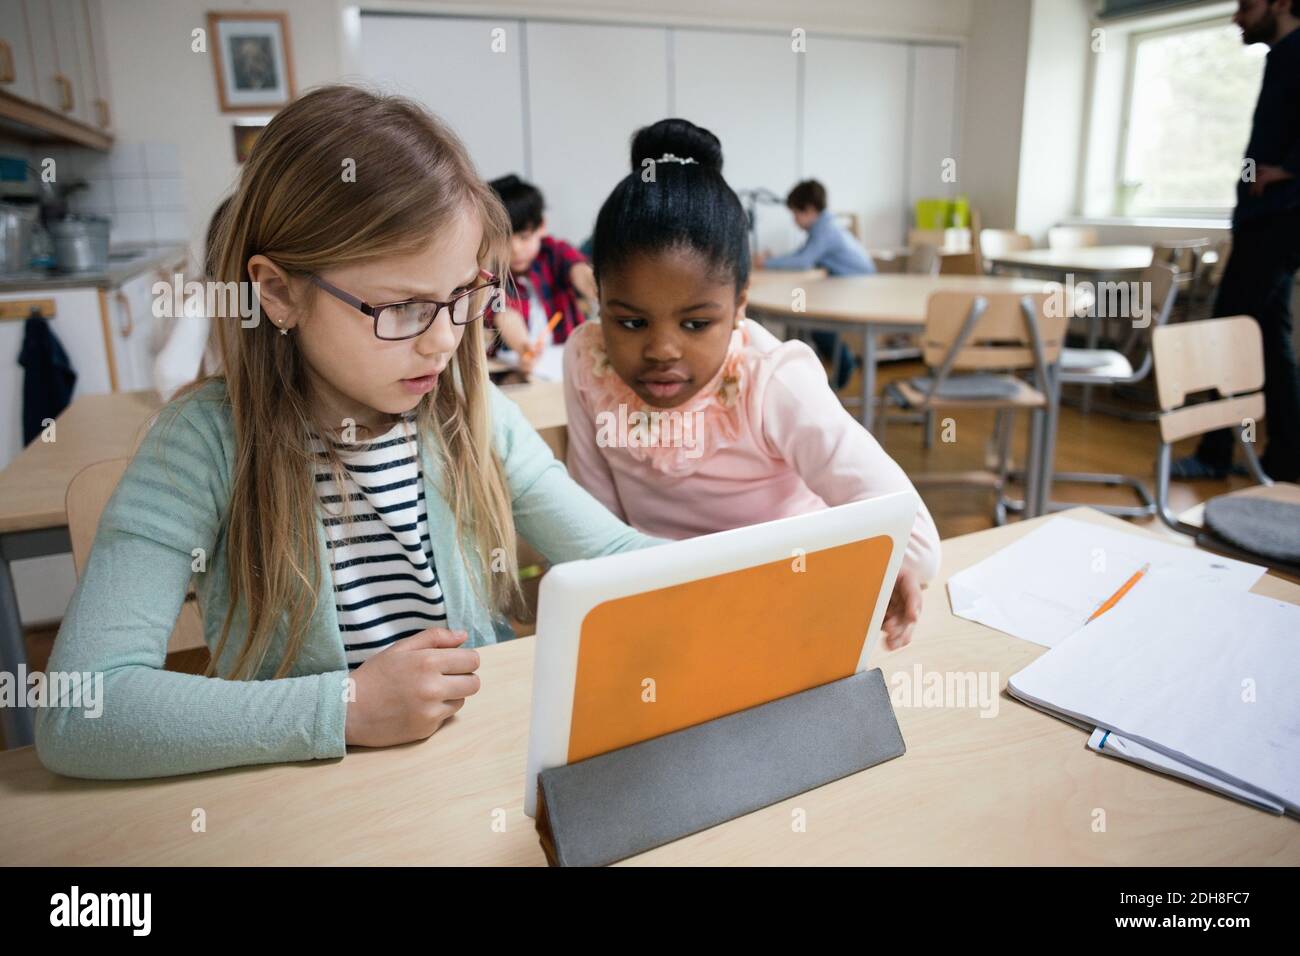 Serious students looking at digital tablet while sitting in classroom Stock Photo